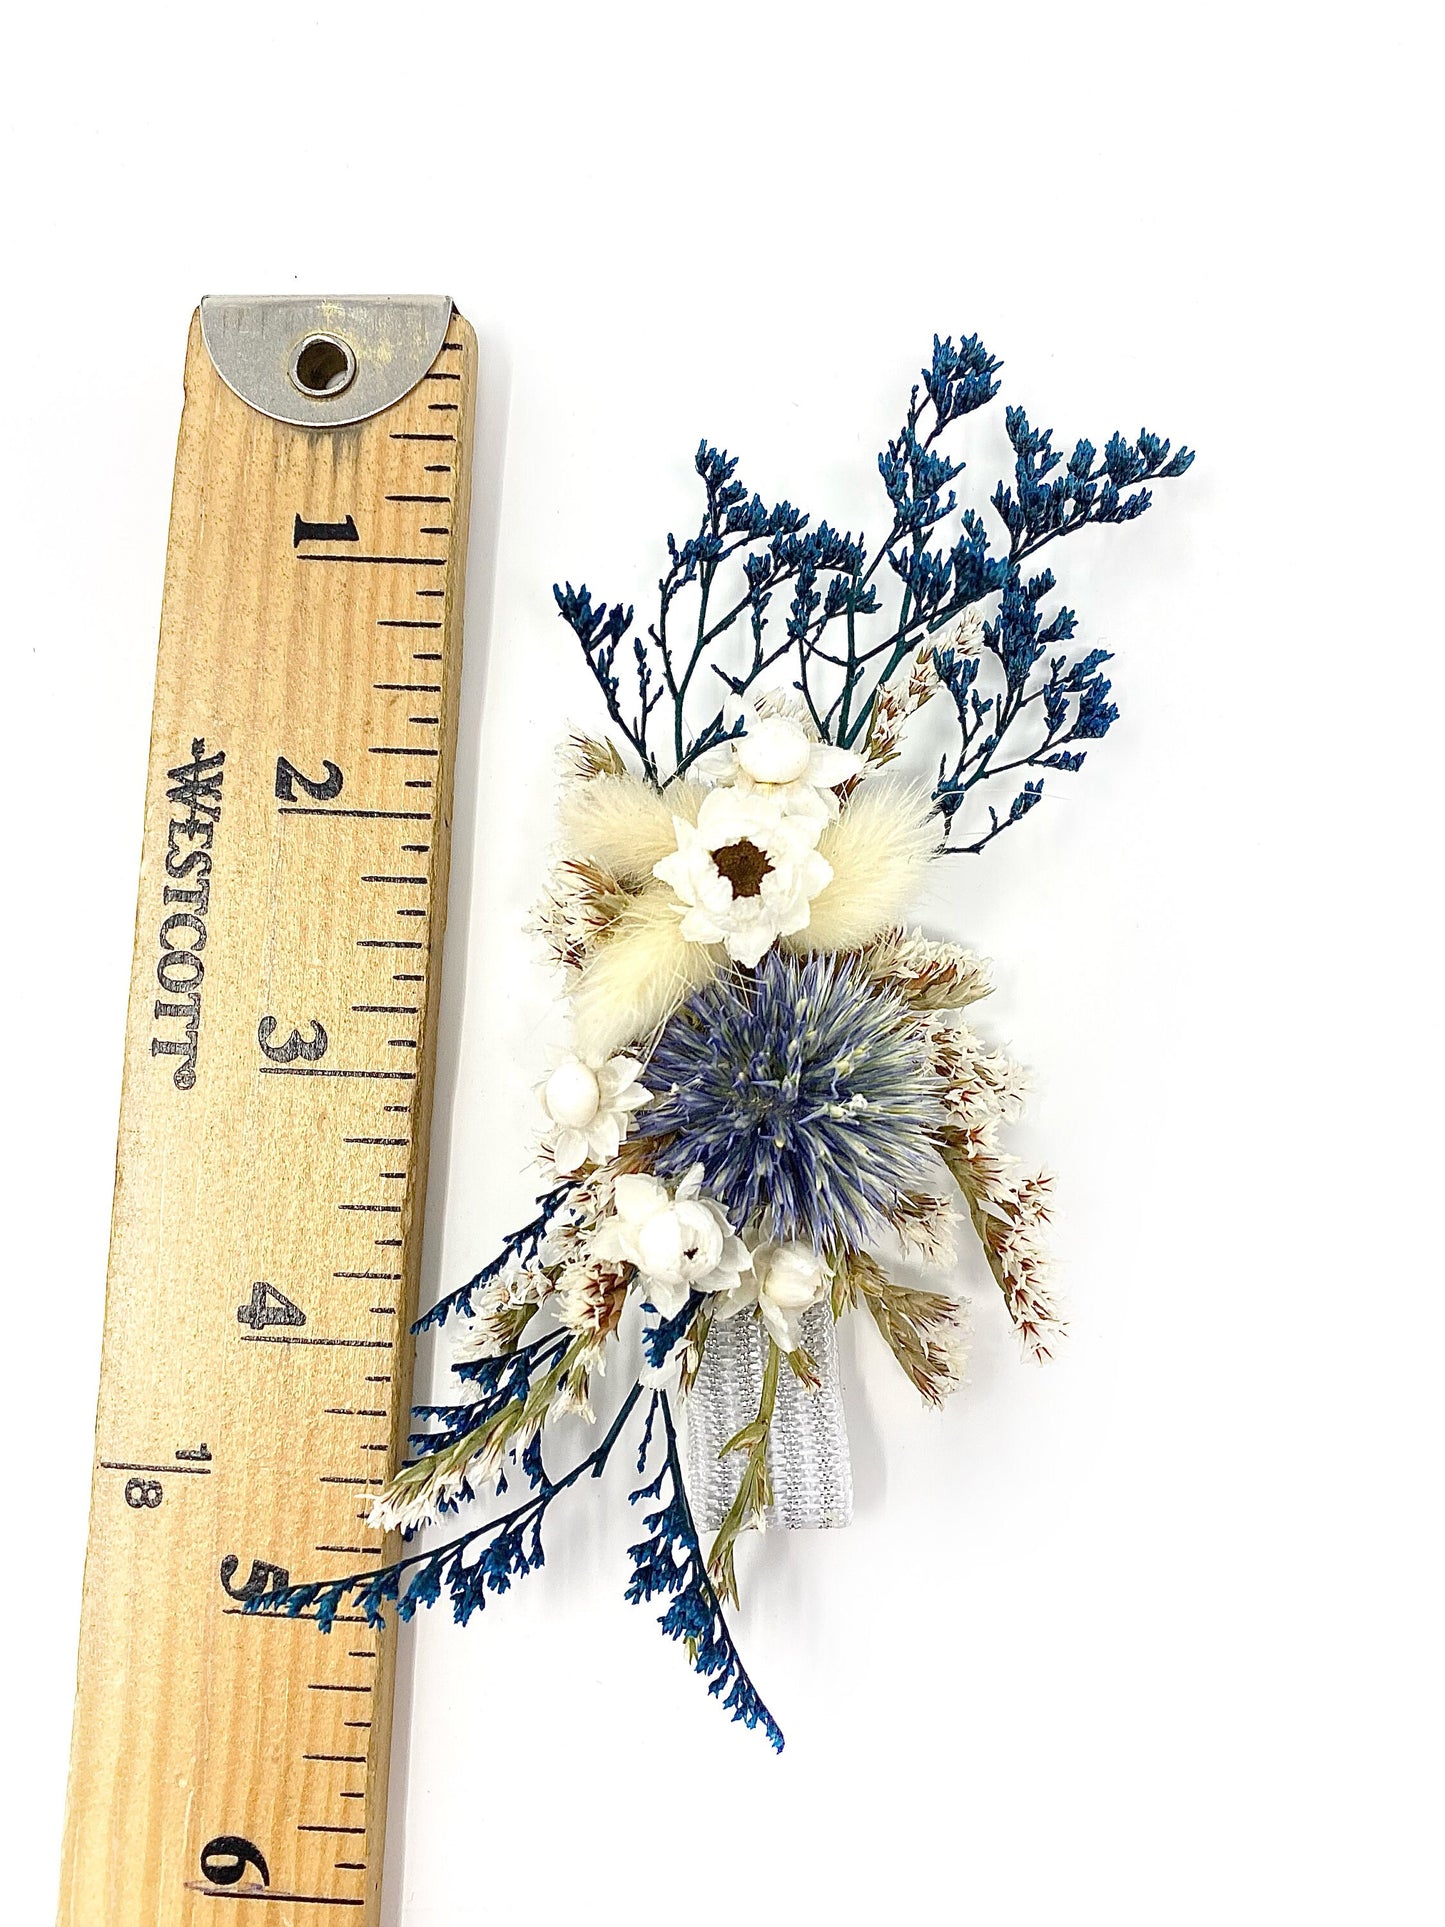 Corsage, Wedding Accessories, Dried Flowers, Preserved Floral, Blue and White, Globe Thistle, Hand Decor, Ammobium, Caspia